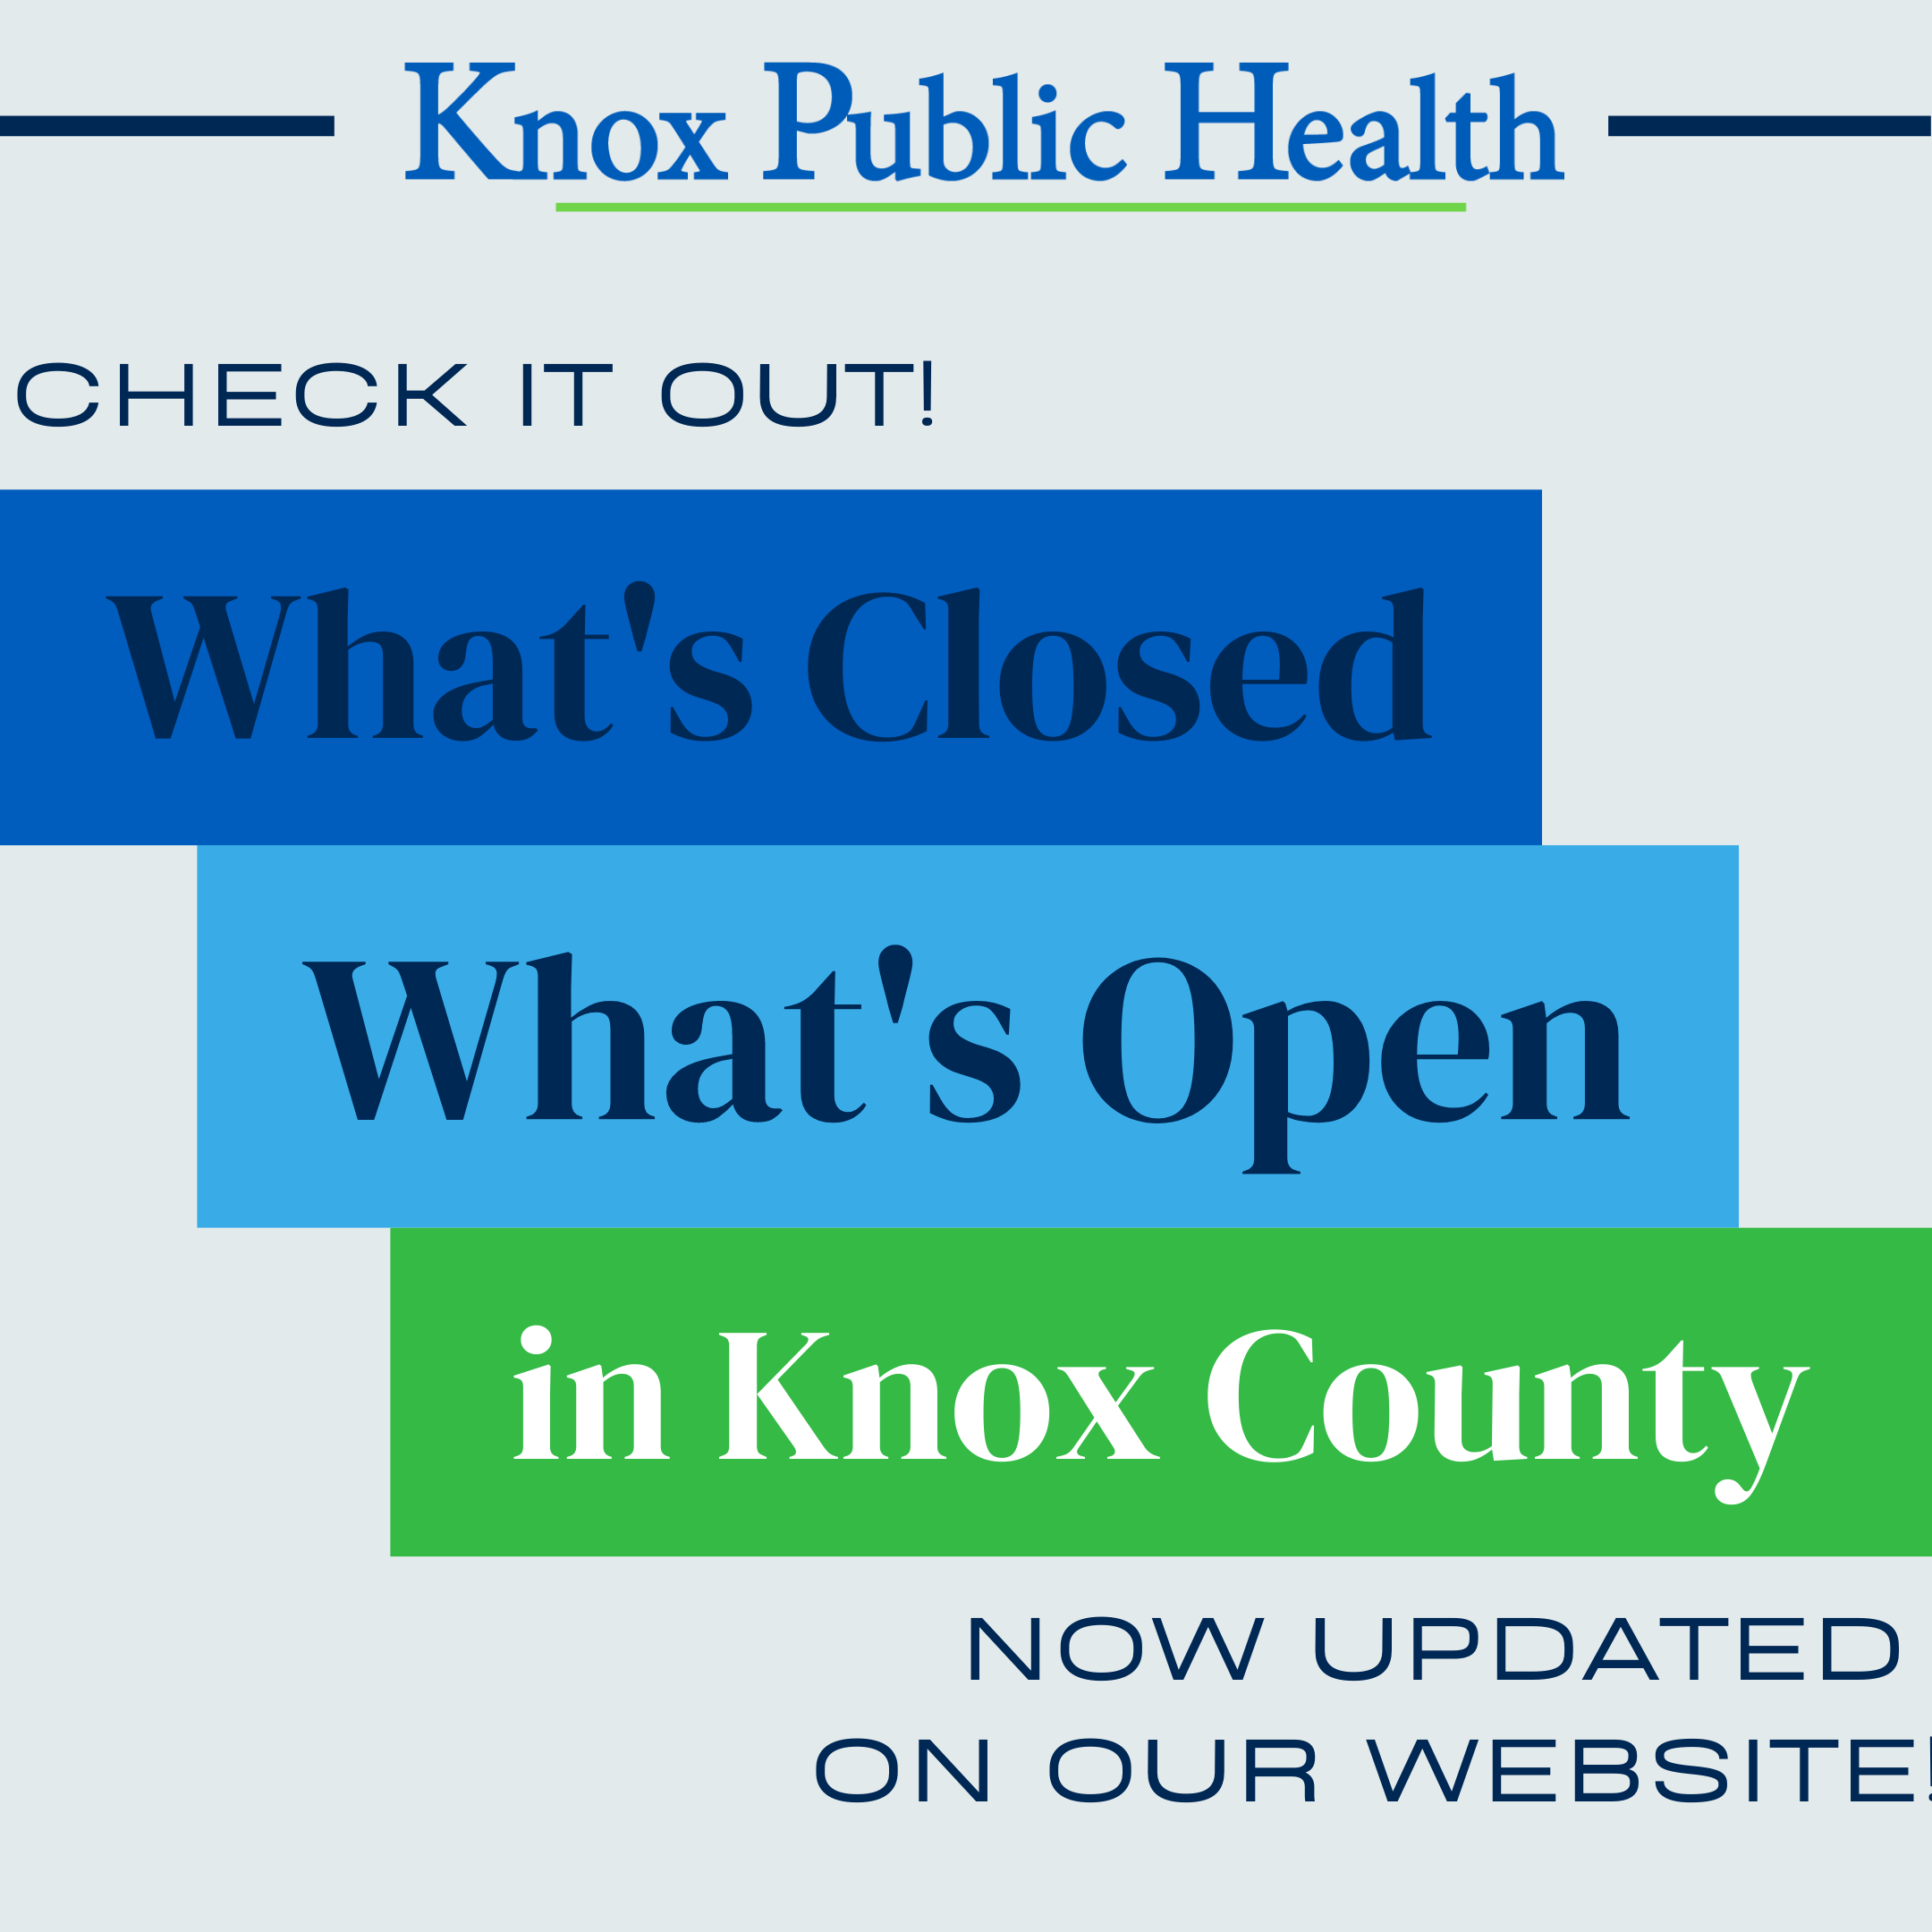 Whats Closed and Open in Knox County 07132020